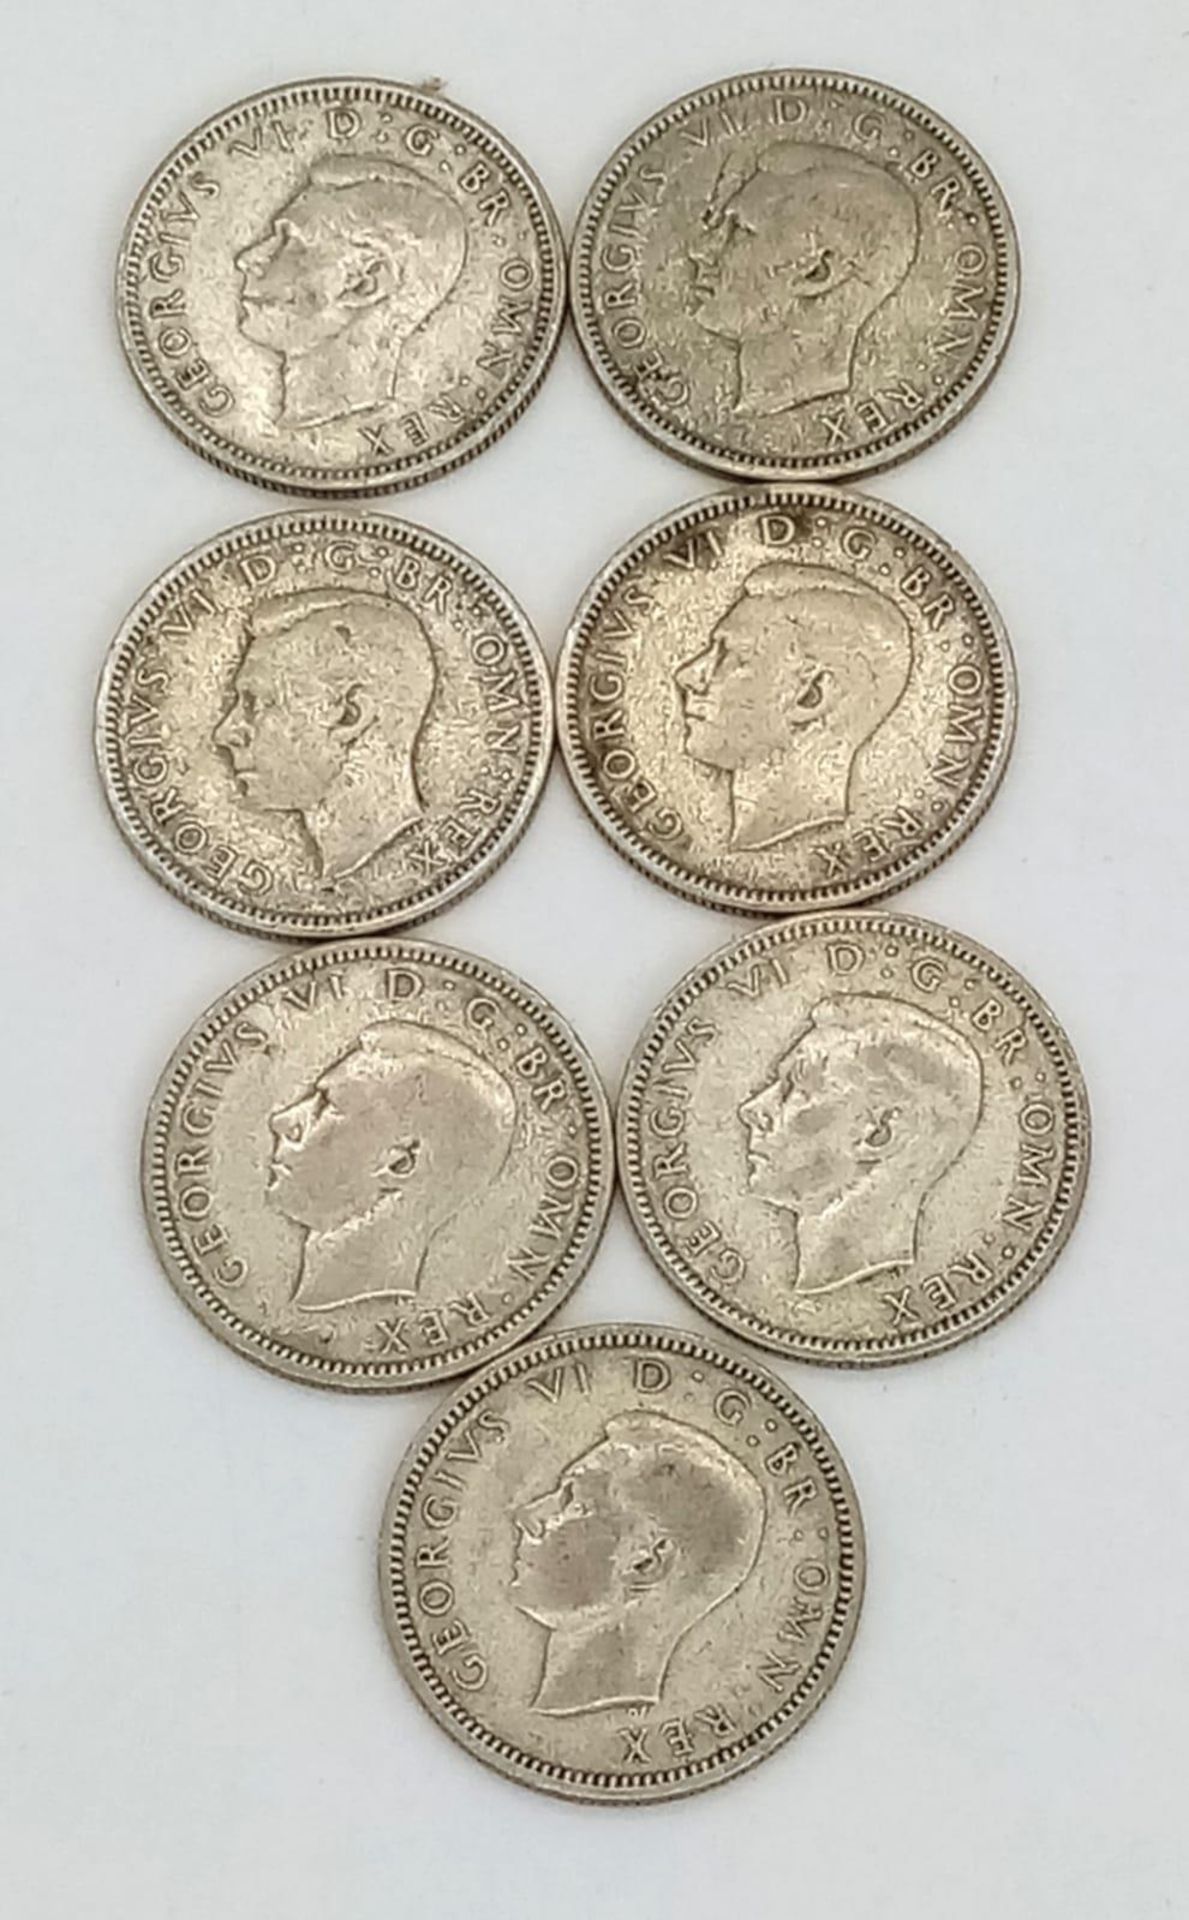 A Consecutive Date Run of 7 x WW2 Silver Sixpences 1939-1945 Inclusive- Very Fine to Extremely